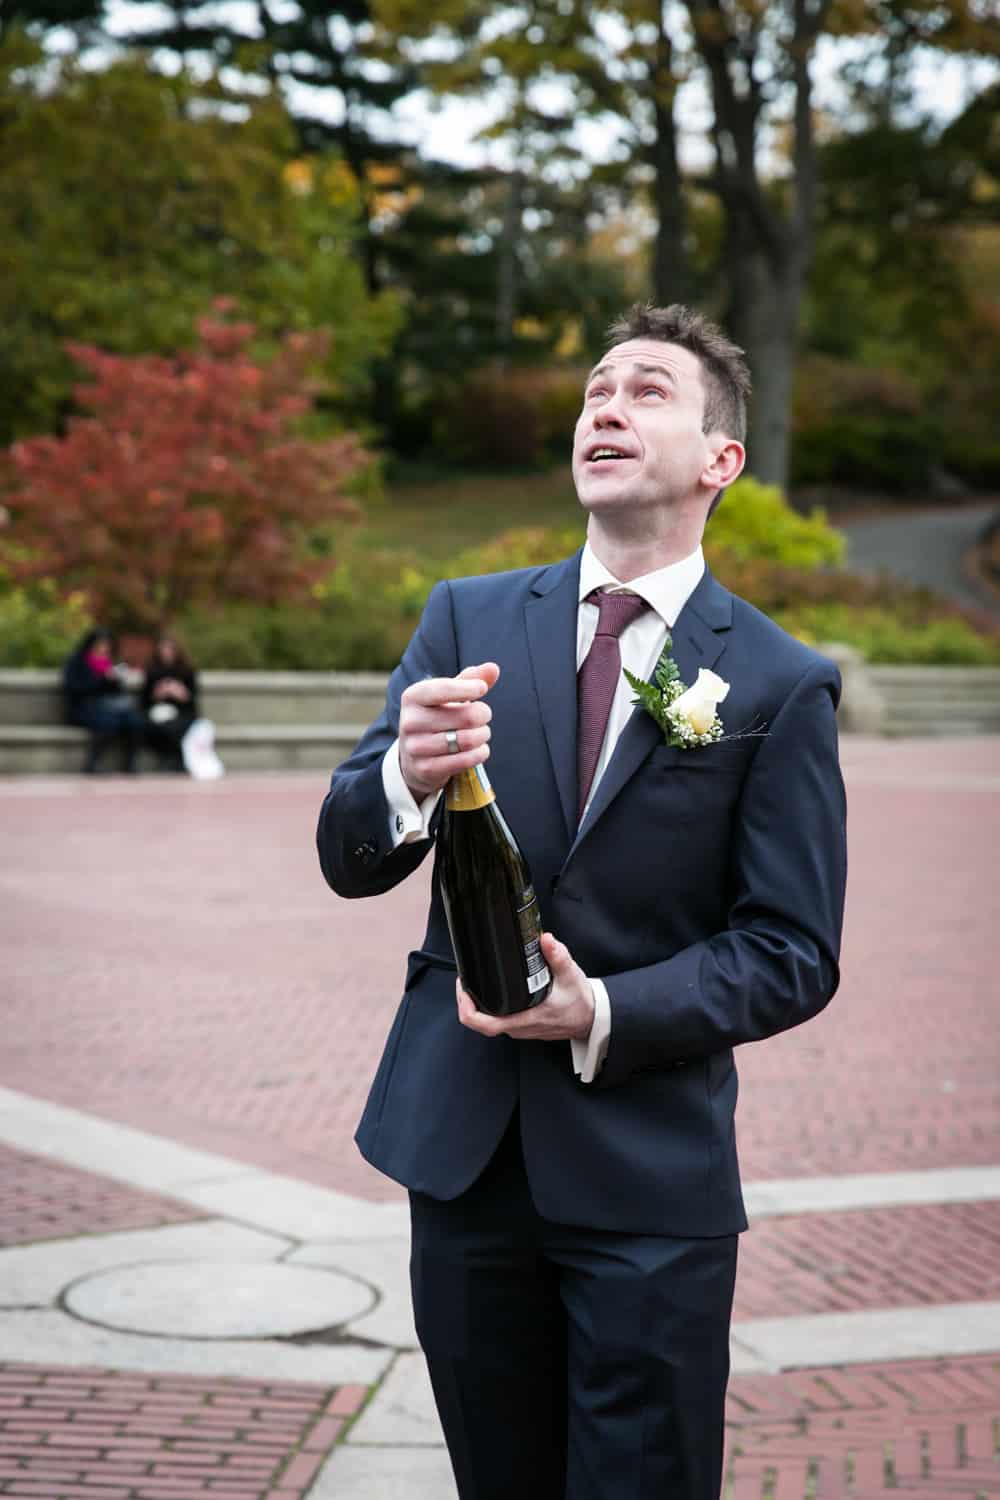 Groom opening champagne bottle at a Bethesda Fountain wedding in Central Park